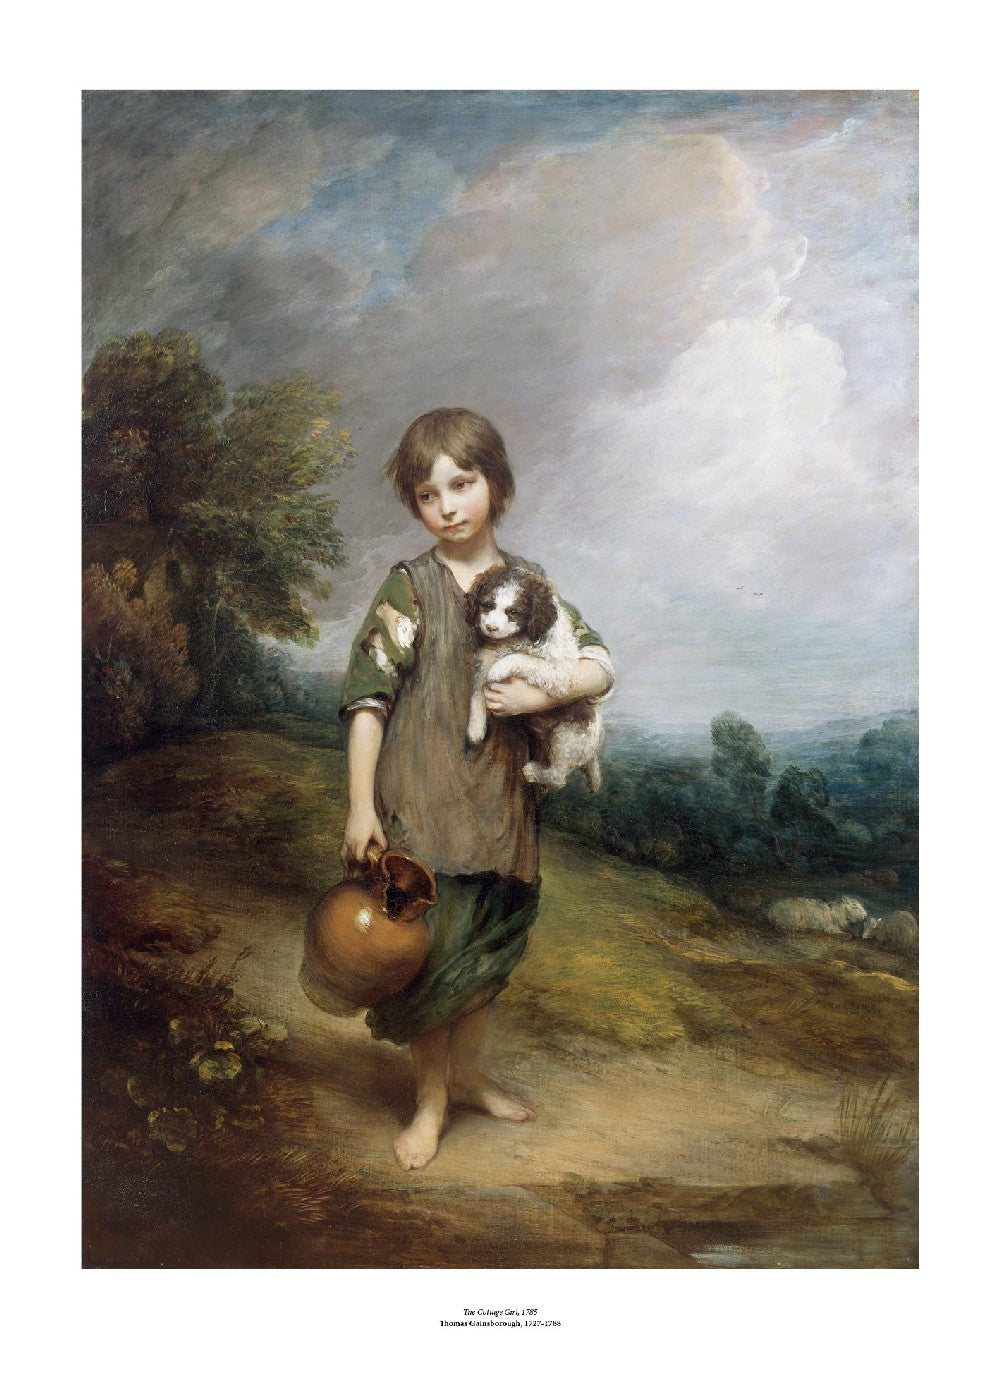 A young girl with short hair and ragged clothes stands in a classic landscape. She holds a jug in one hand and a small dog in her other arm. The painting is surrounded by a white border with its name and painter at bottom centre.